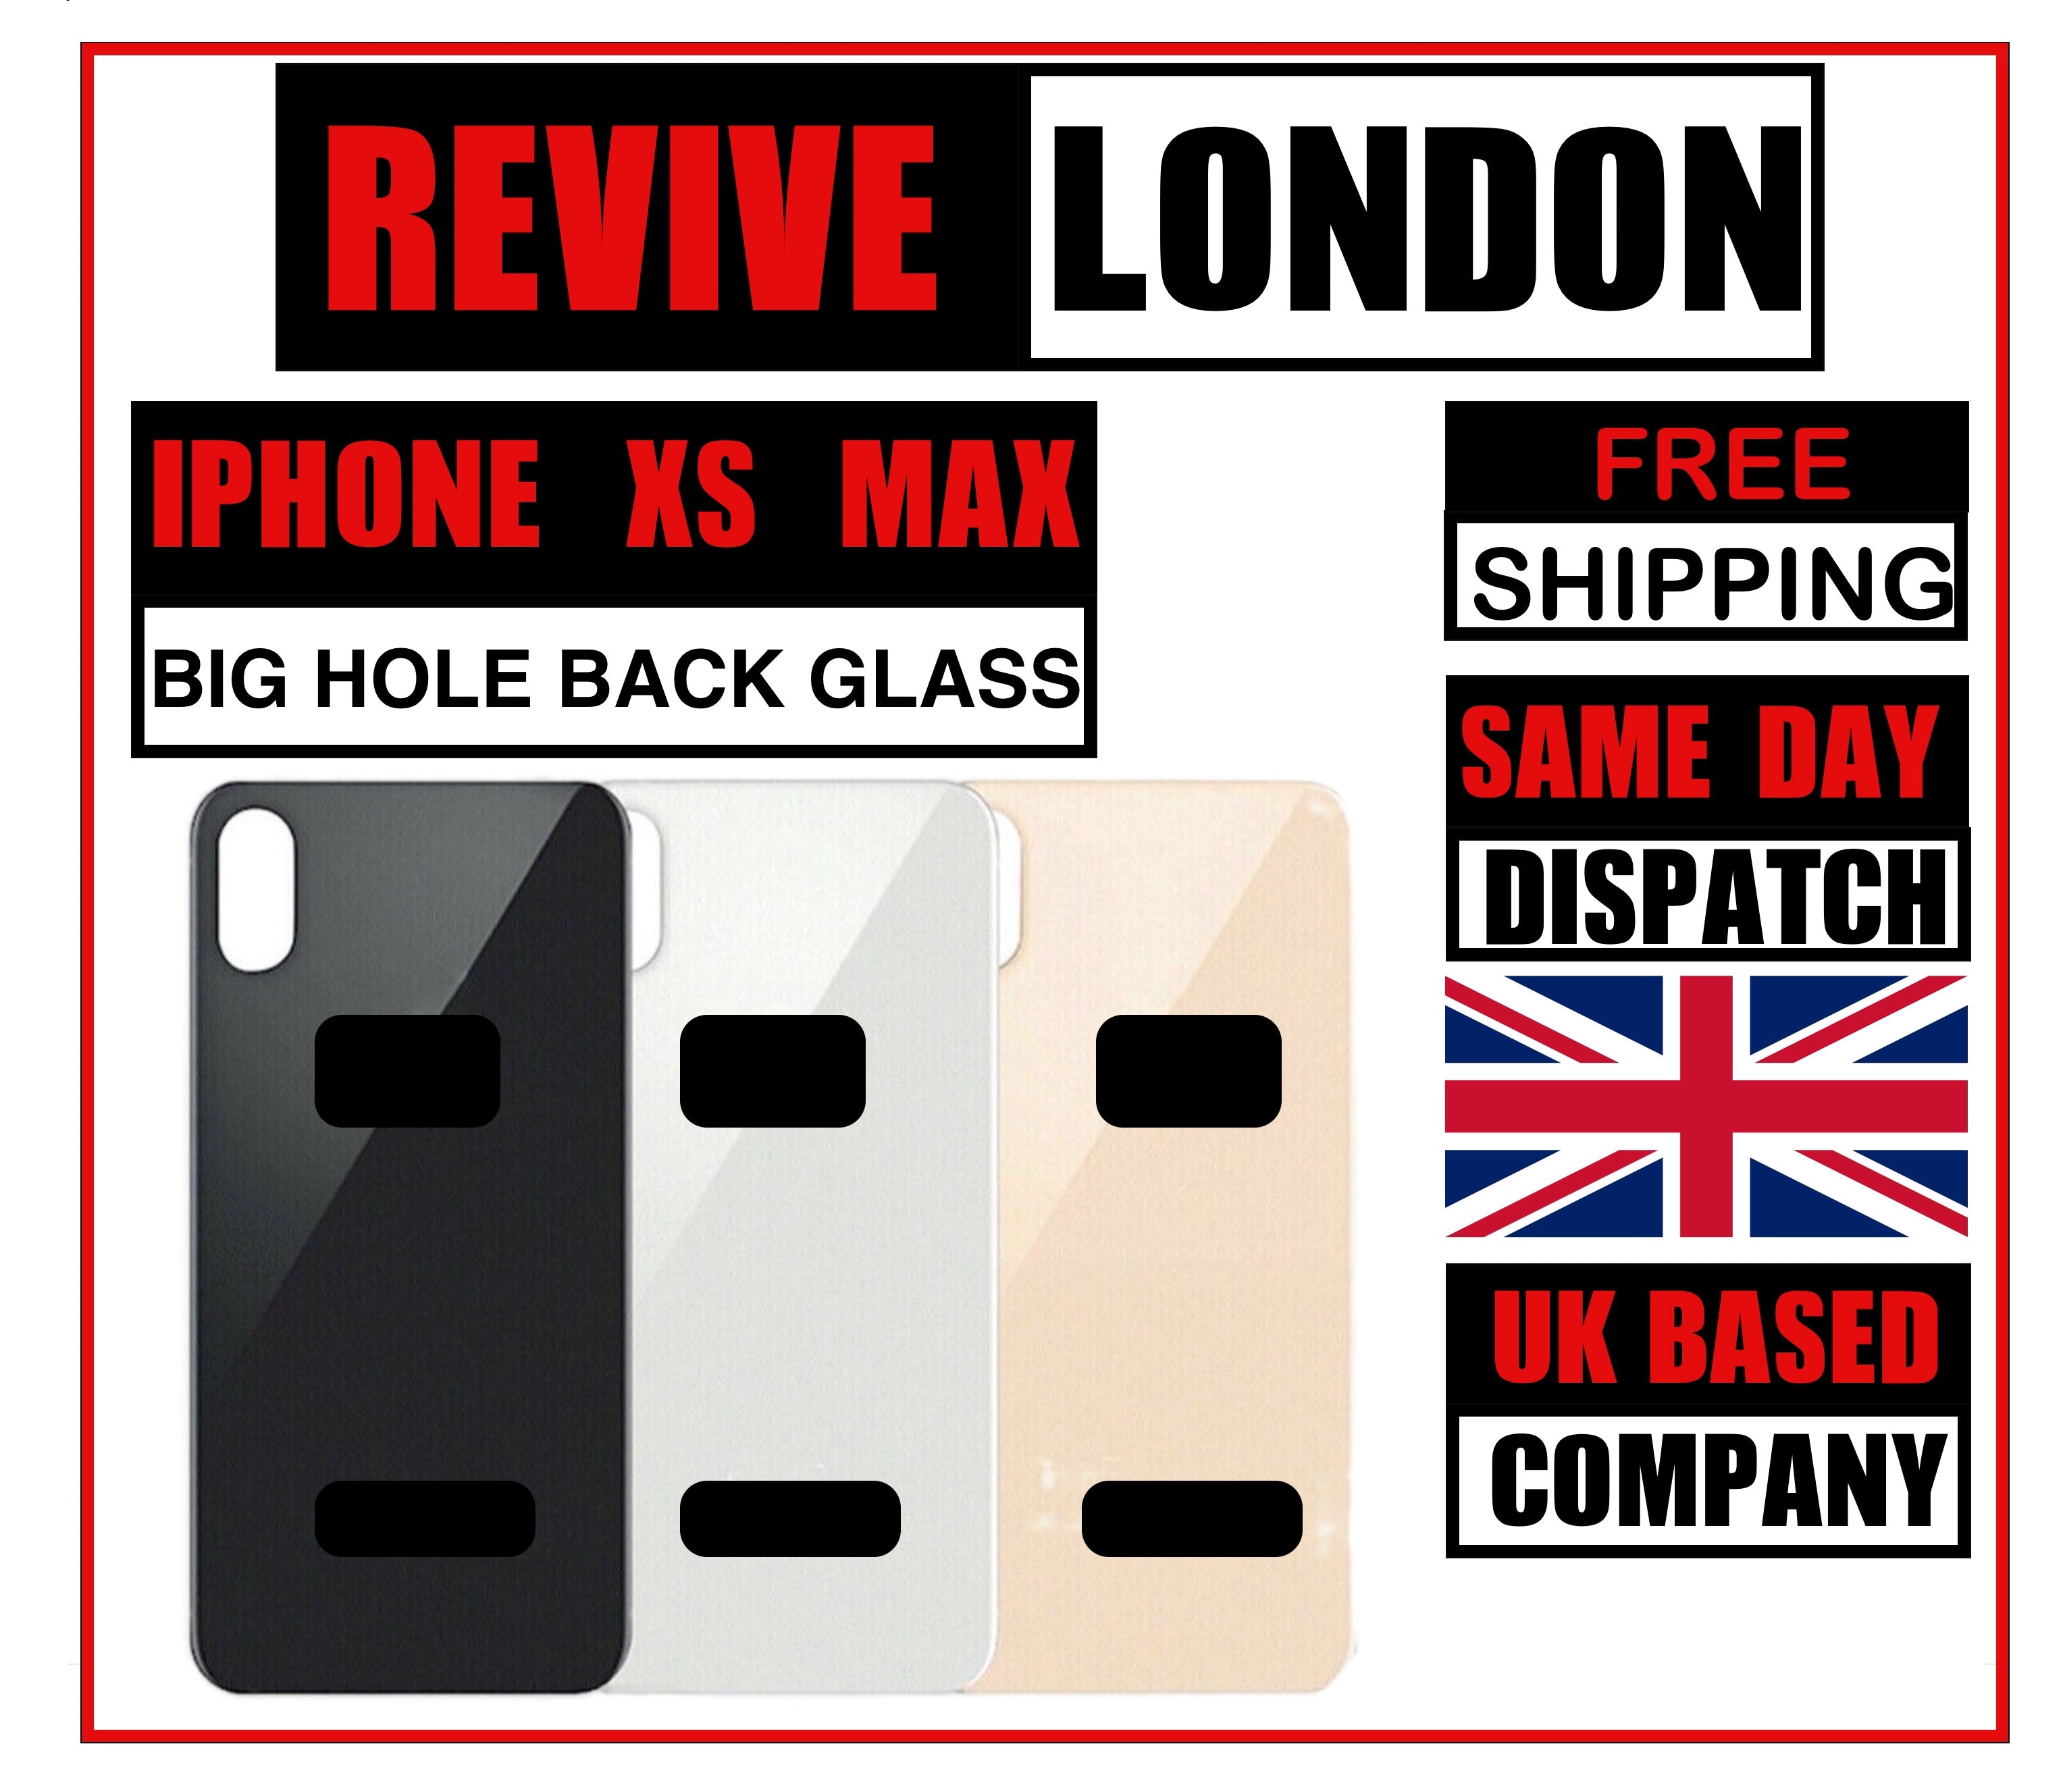 For Apple iPhone XS MAX  Replacement Back - Rear Glass Big Hole Camera